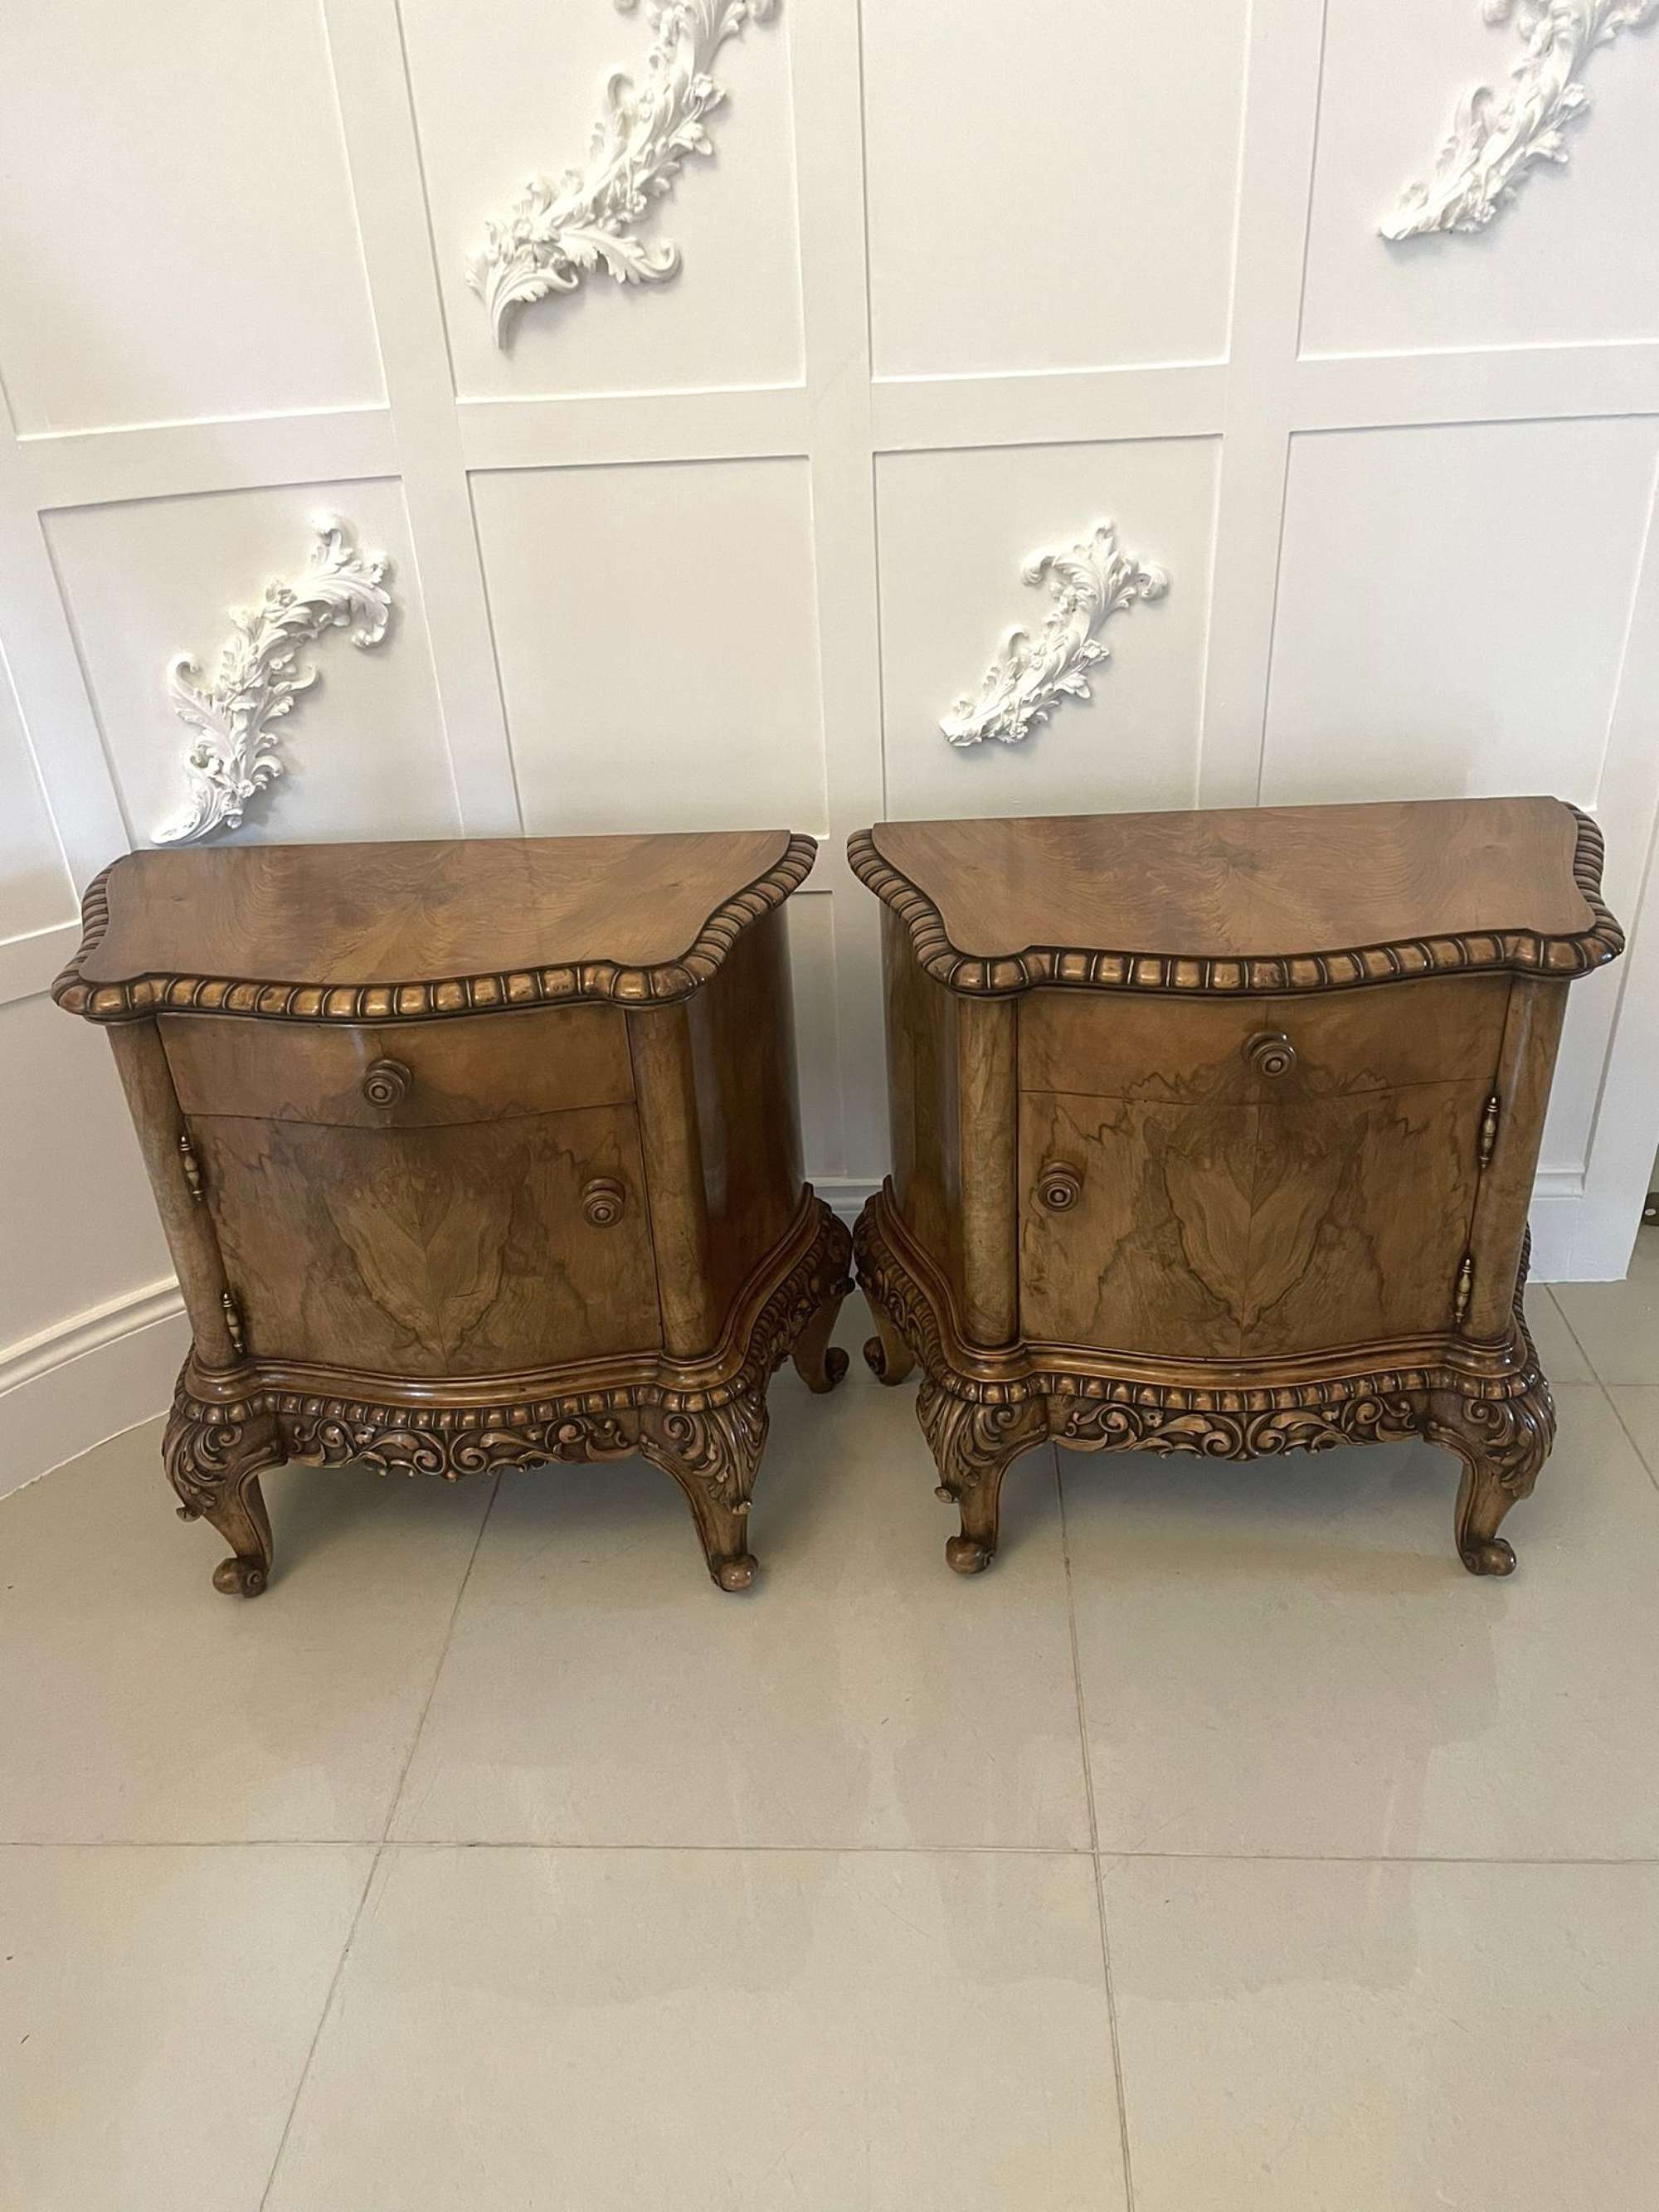 Outstanding Pair Of Antique Figured And Carved Walnut Bedside Cabinets